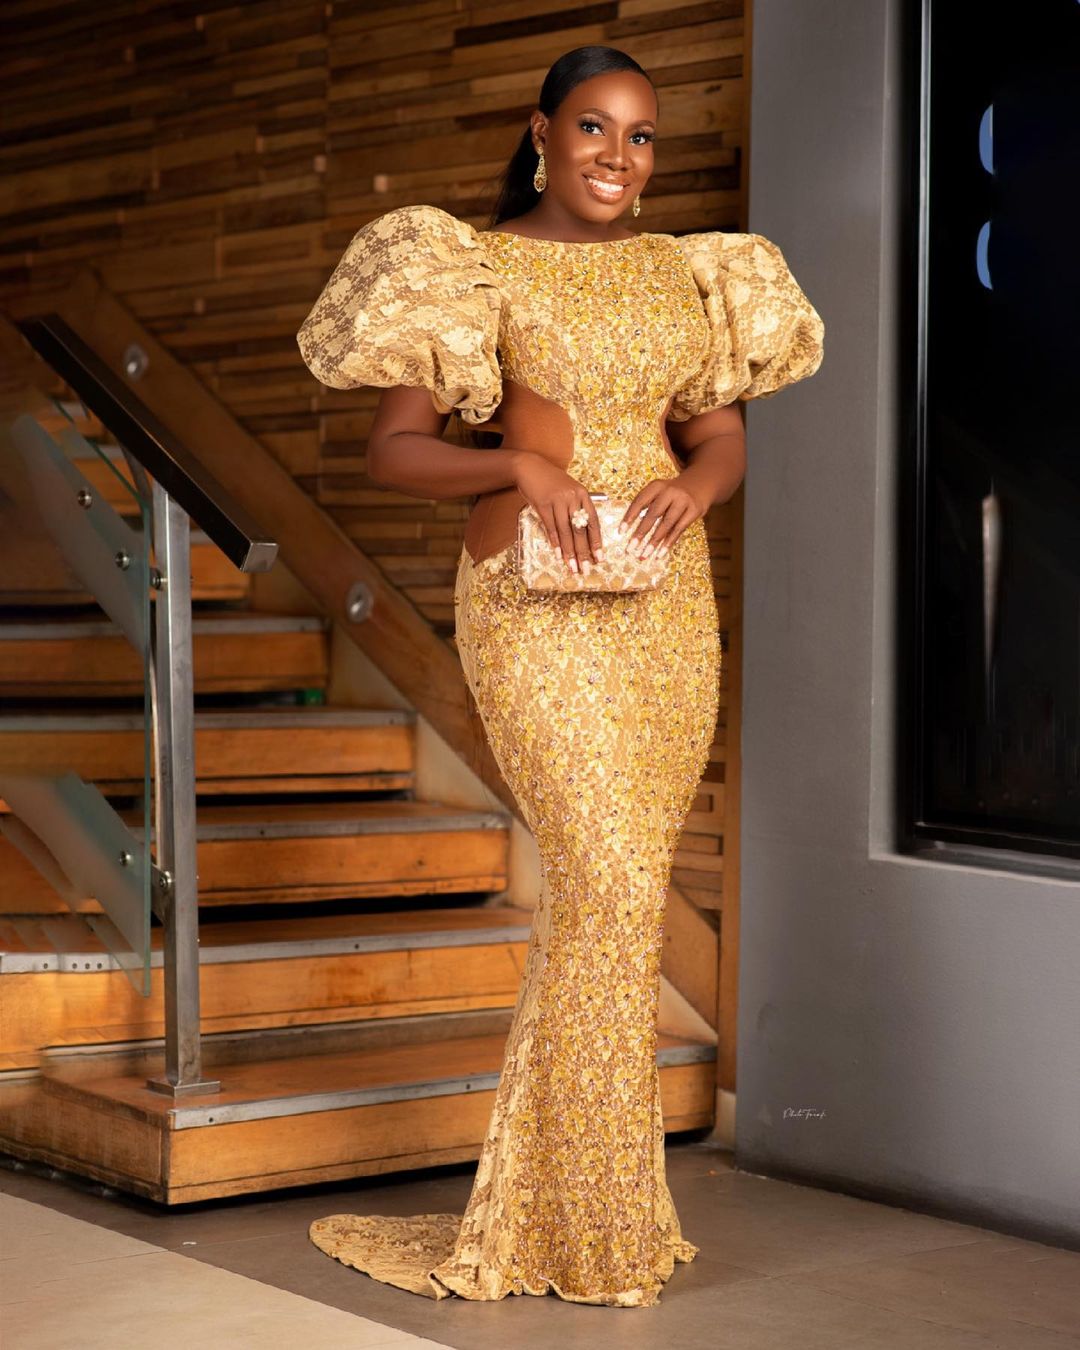 African style stars and celebrities best dressed 